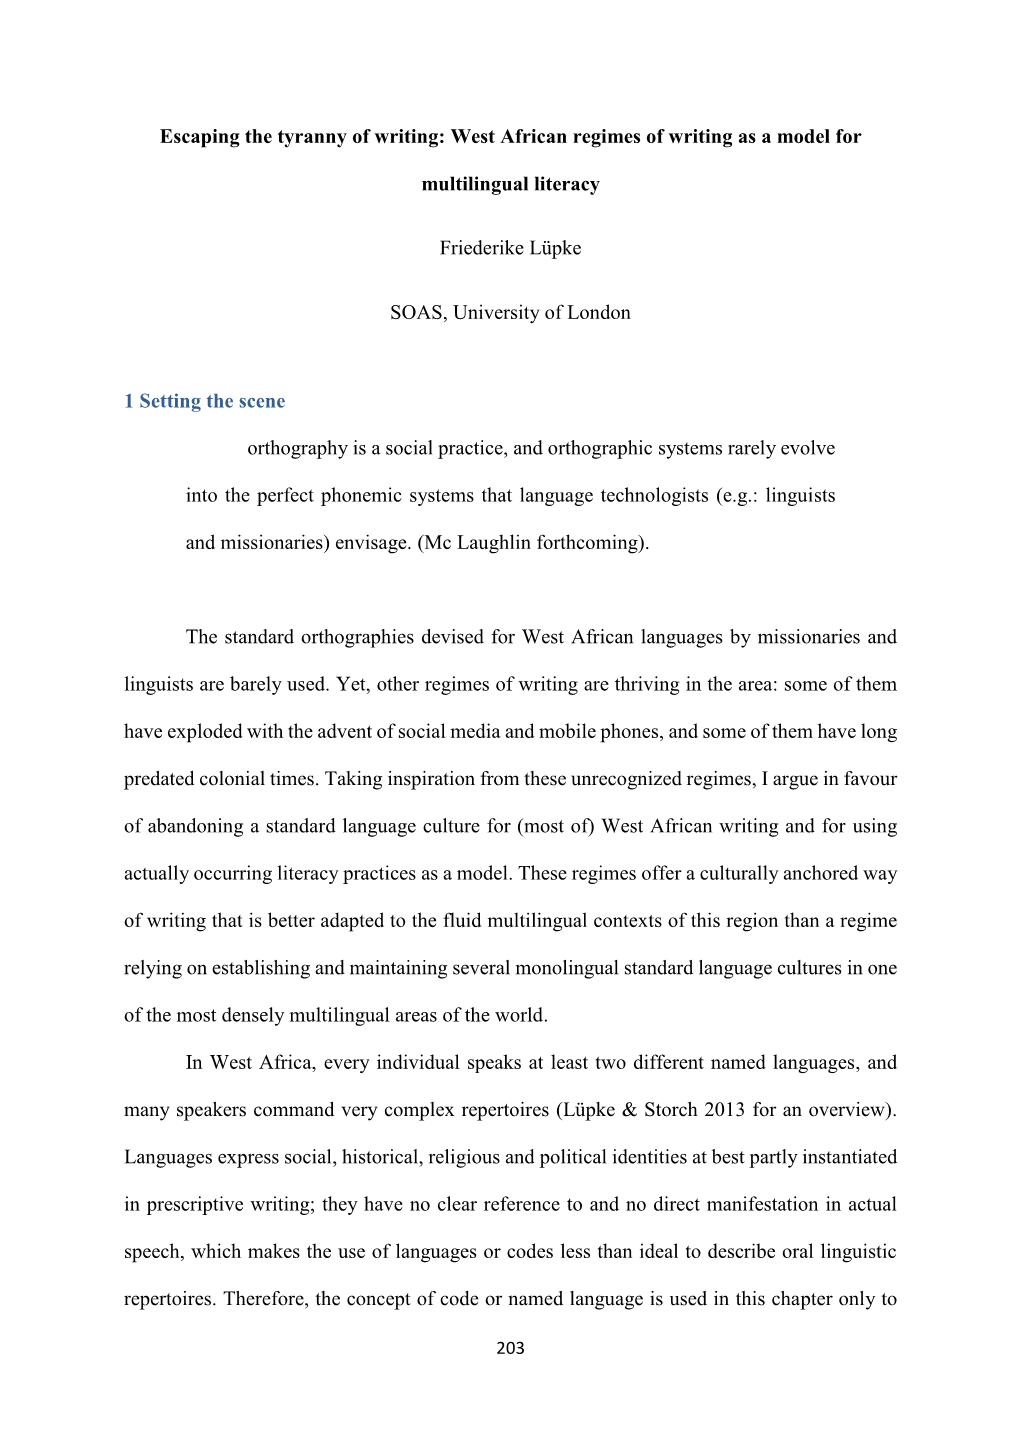 Escaping the Tyranny of Writing: West African Regimes of Writing As a Model For